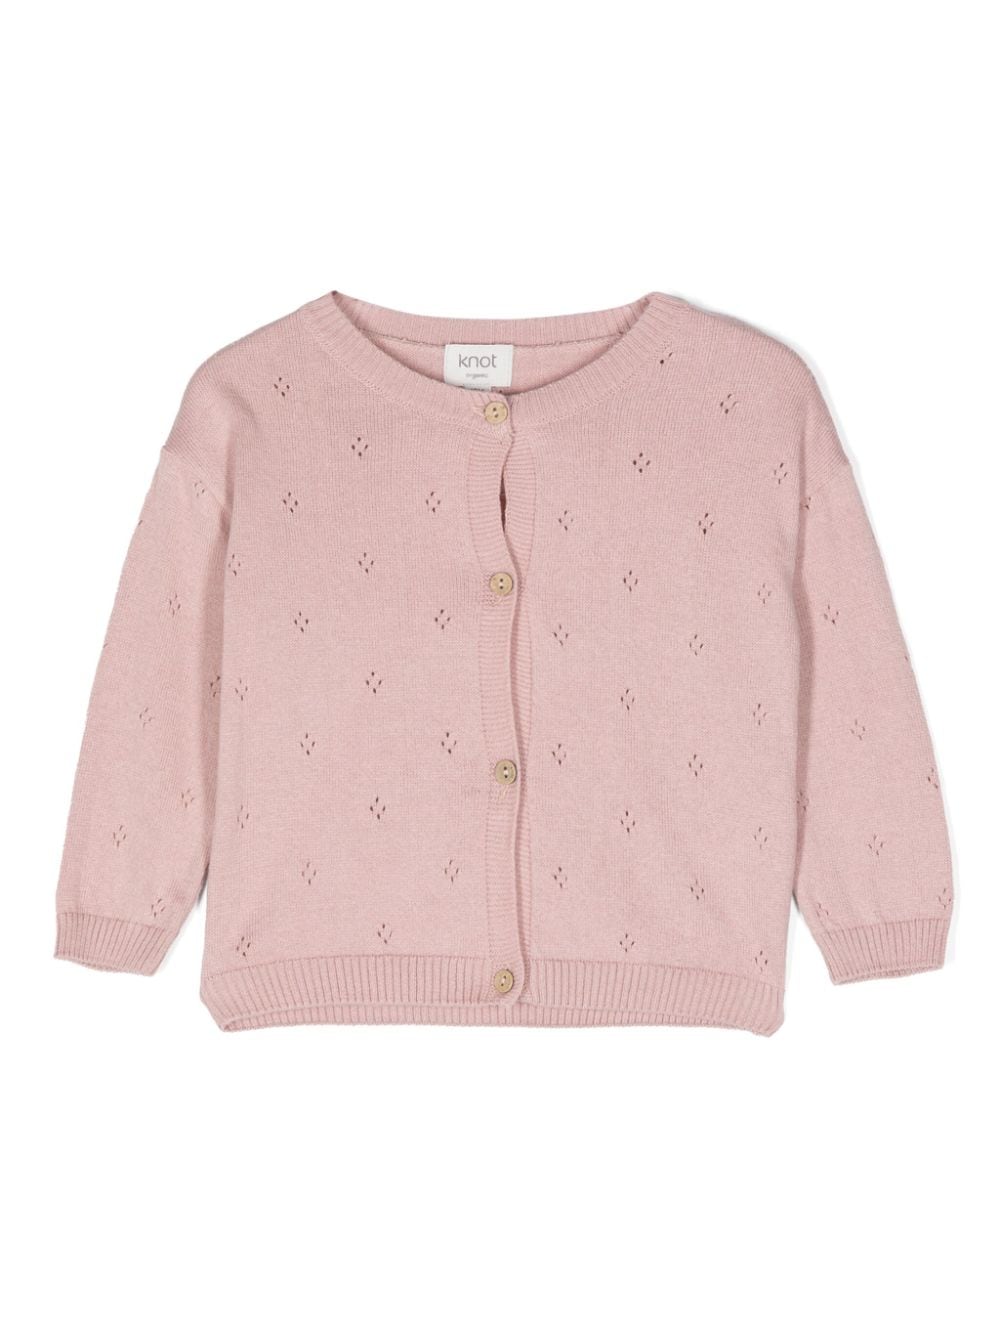 Knot Babies' Sophie Knitted Cardigan In Pink